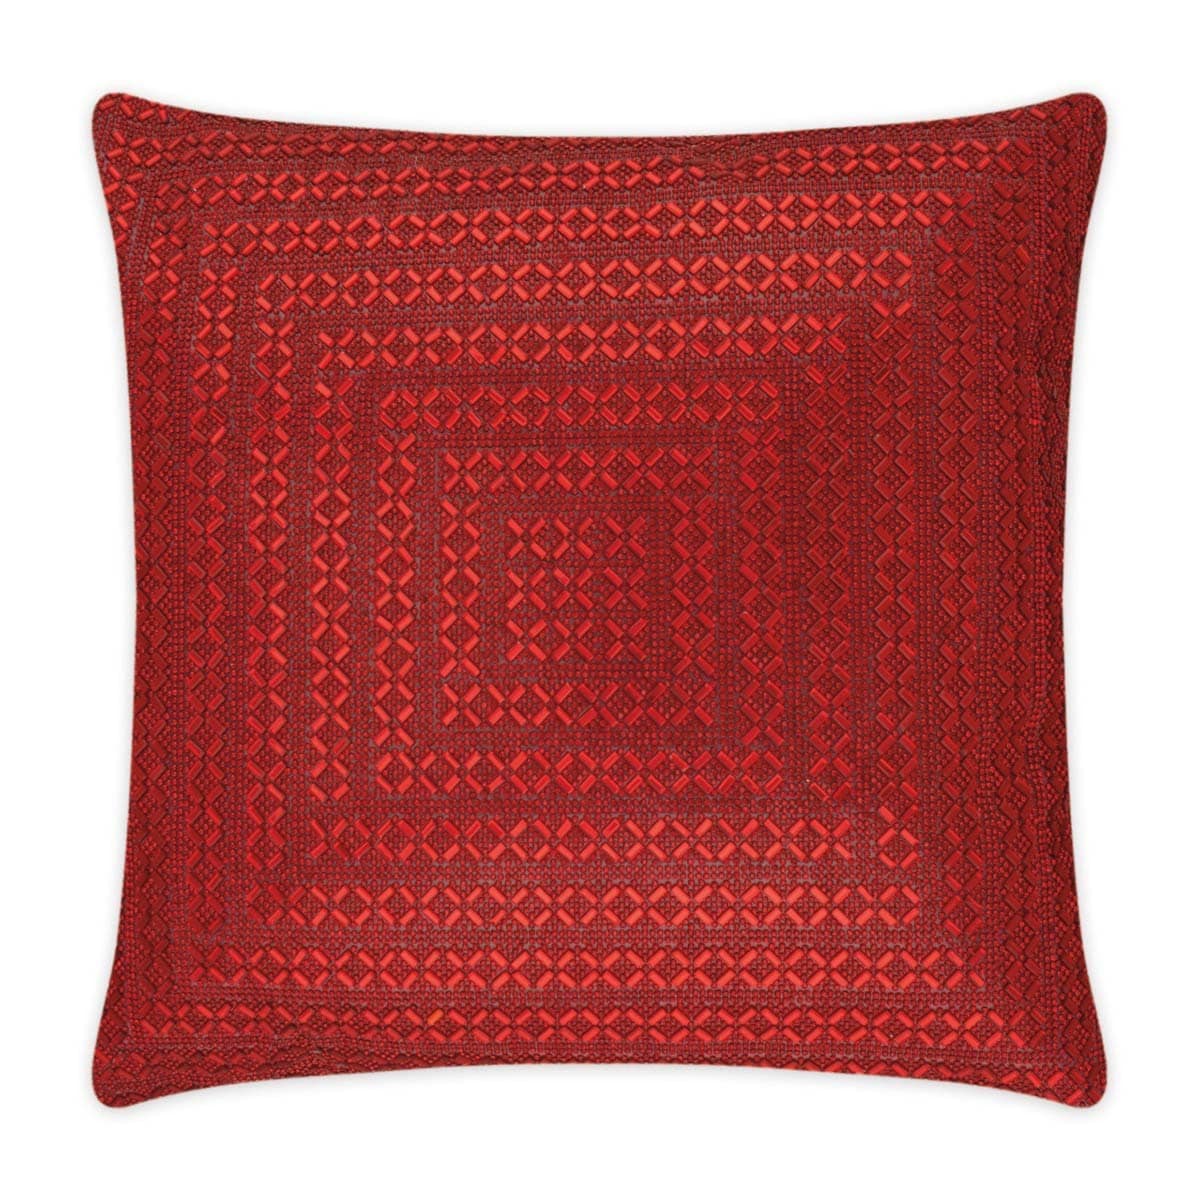 https://ak1.ostkcdn.com/images/products/is/images/direct/e0651693c6013a1325a505d442408a34d6ac9c07/Sparkles-Home-Madison-Avenue-Rhinestone-Pillow.jpg